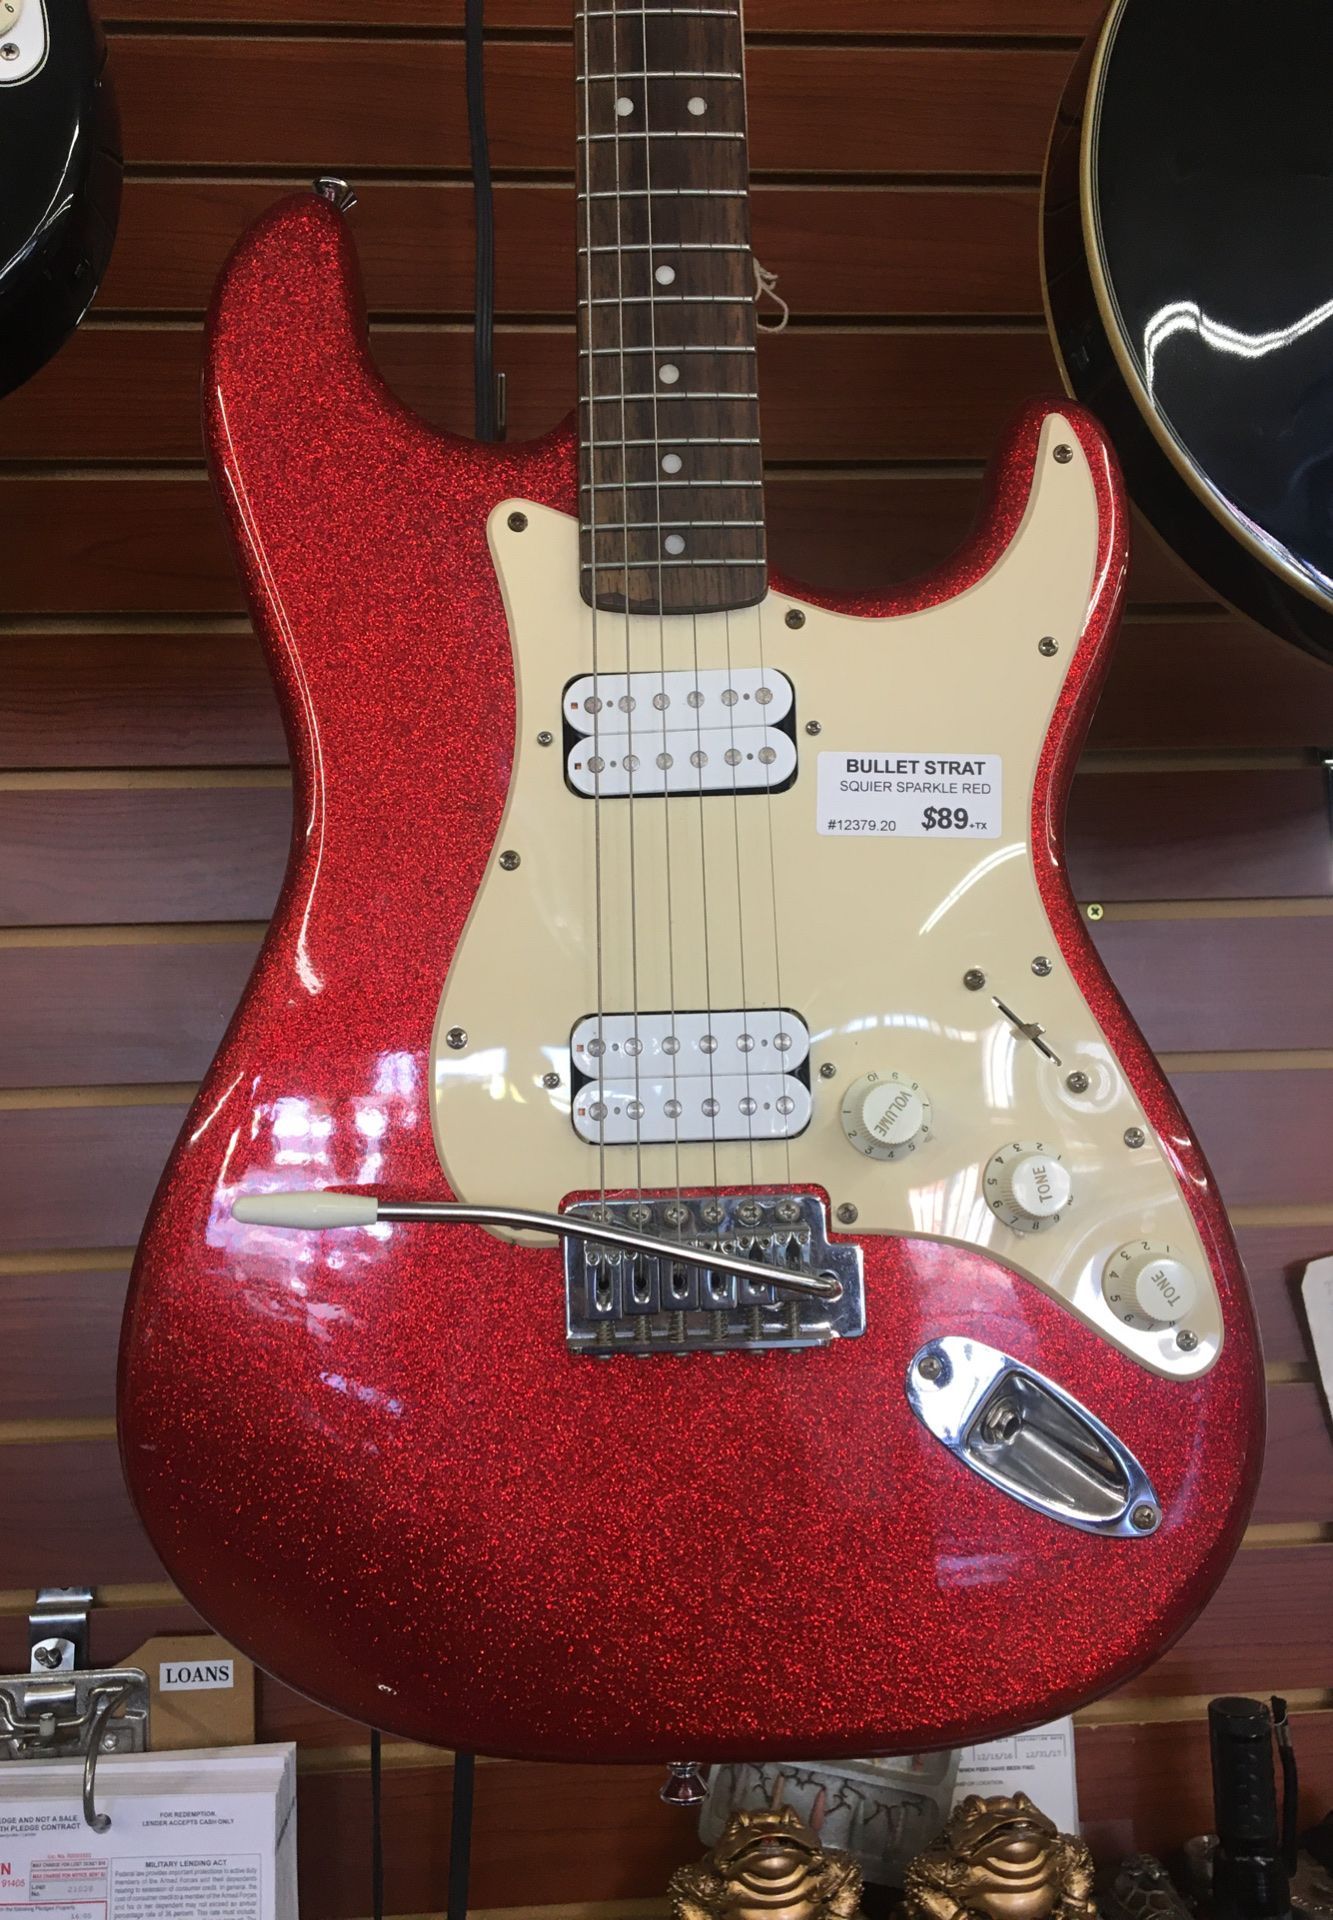 Squier bullet strat sparkle red electric guitar